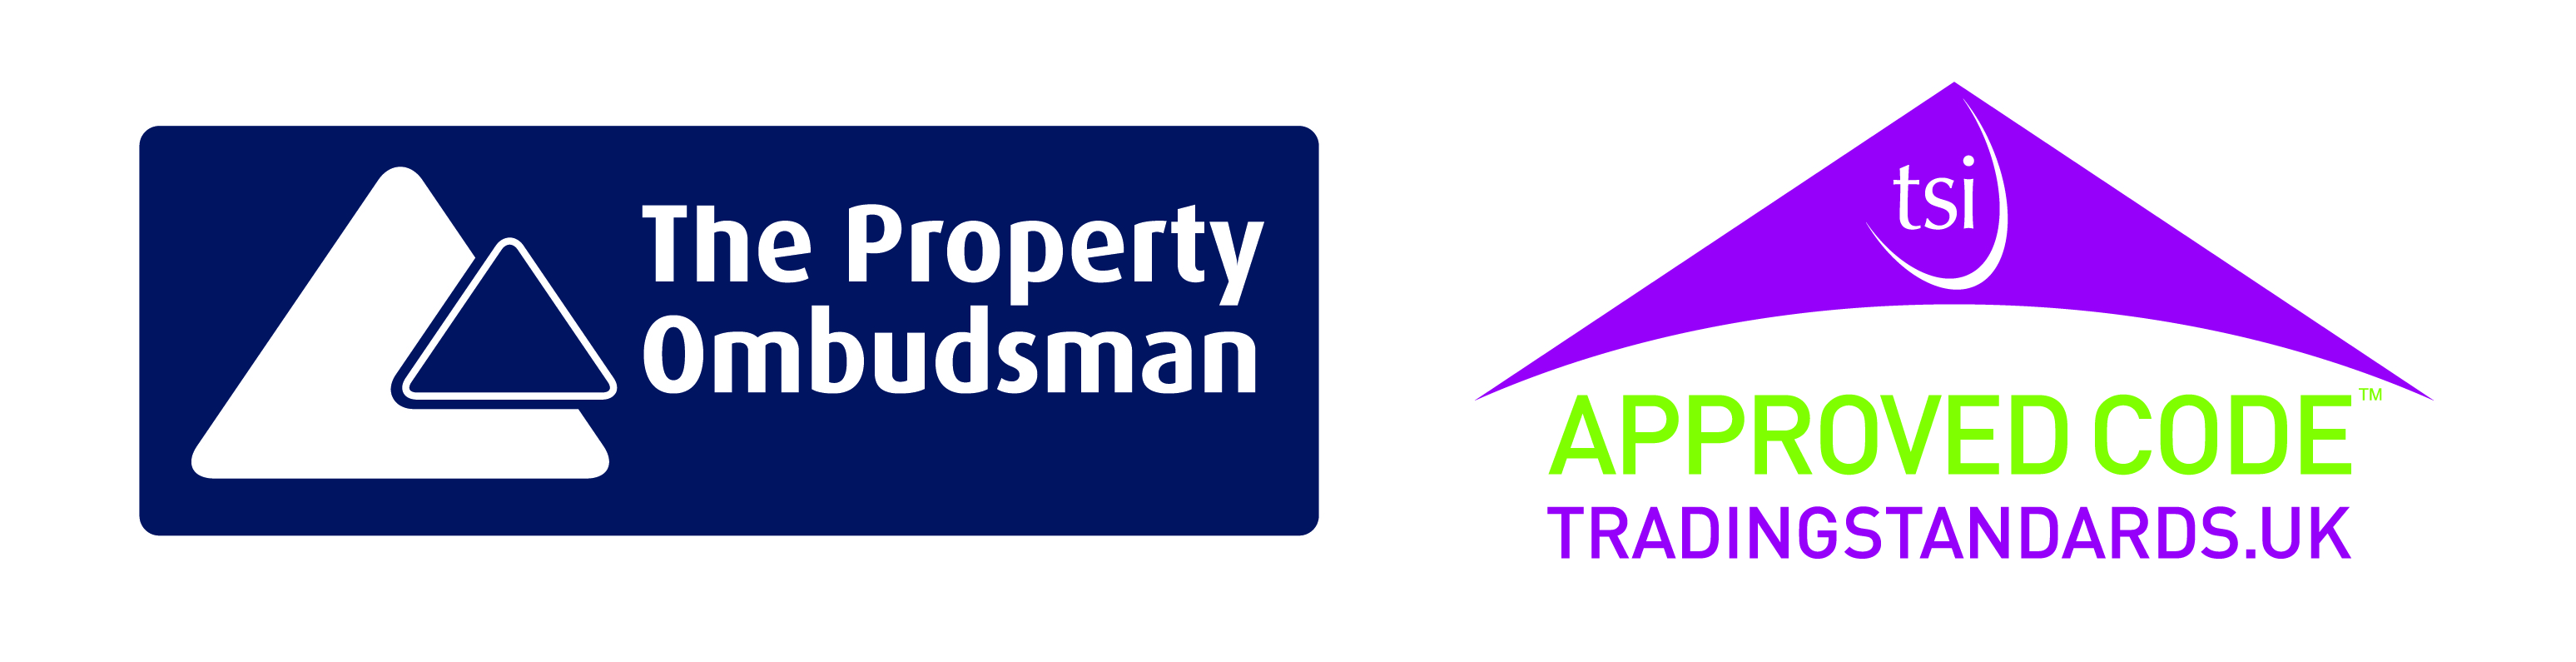 Phillip James Letting Agents are members of The Property Ombudsman